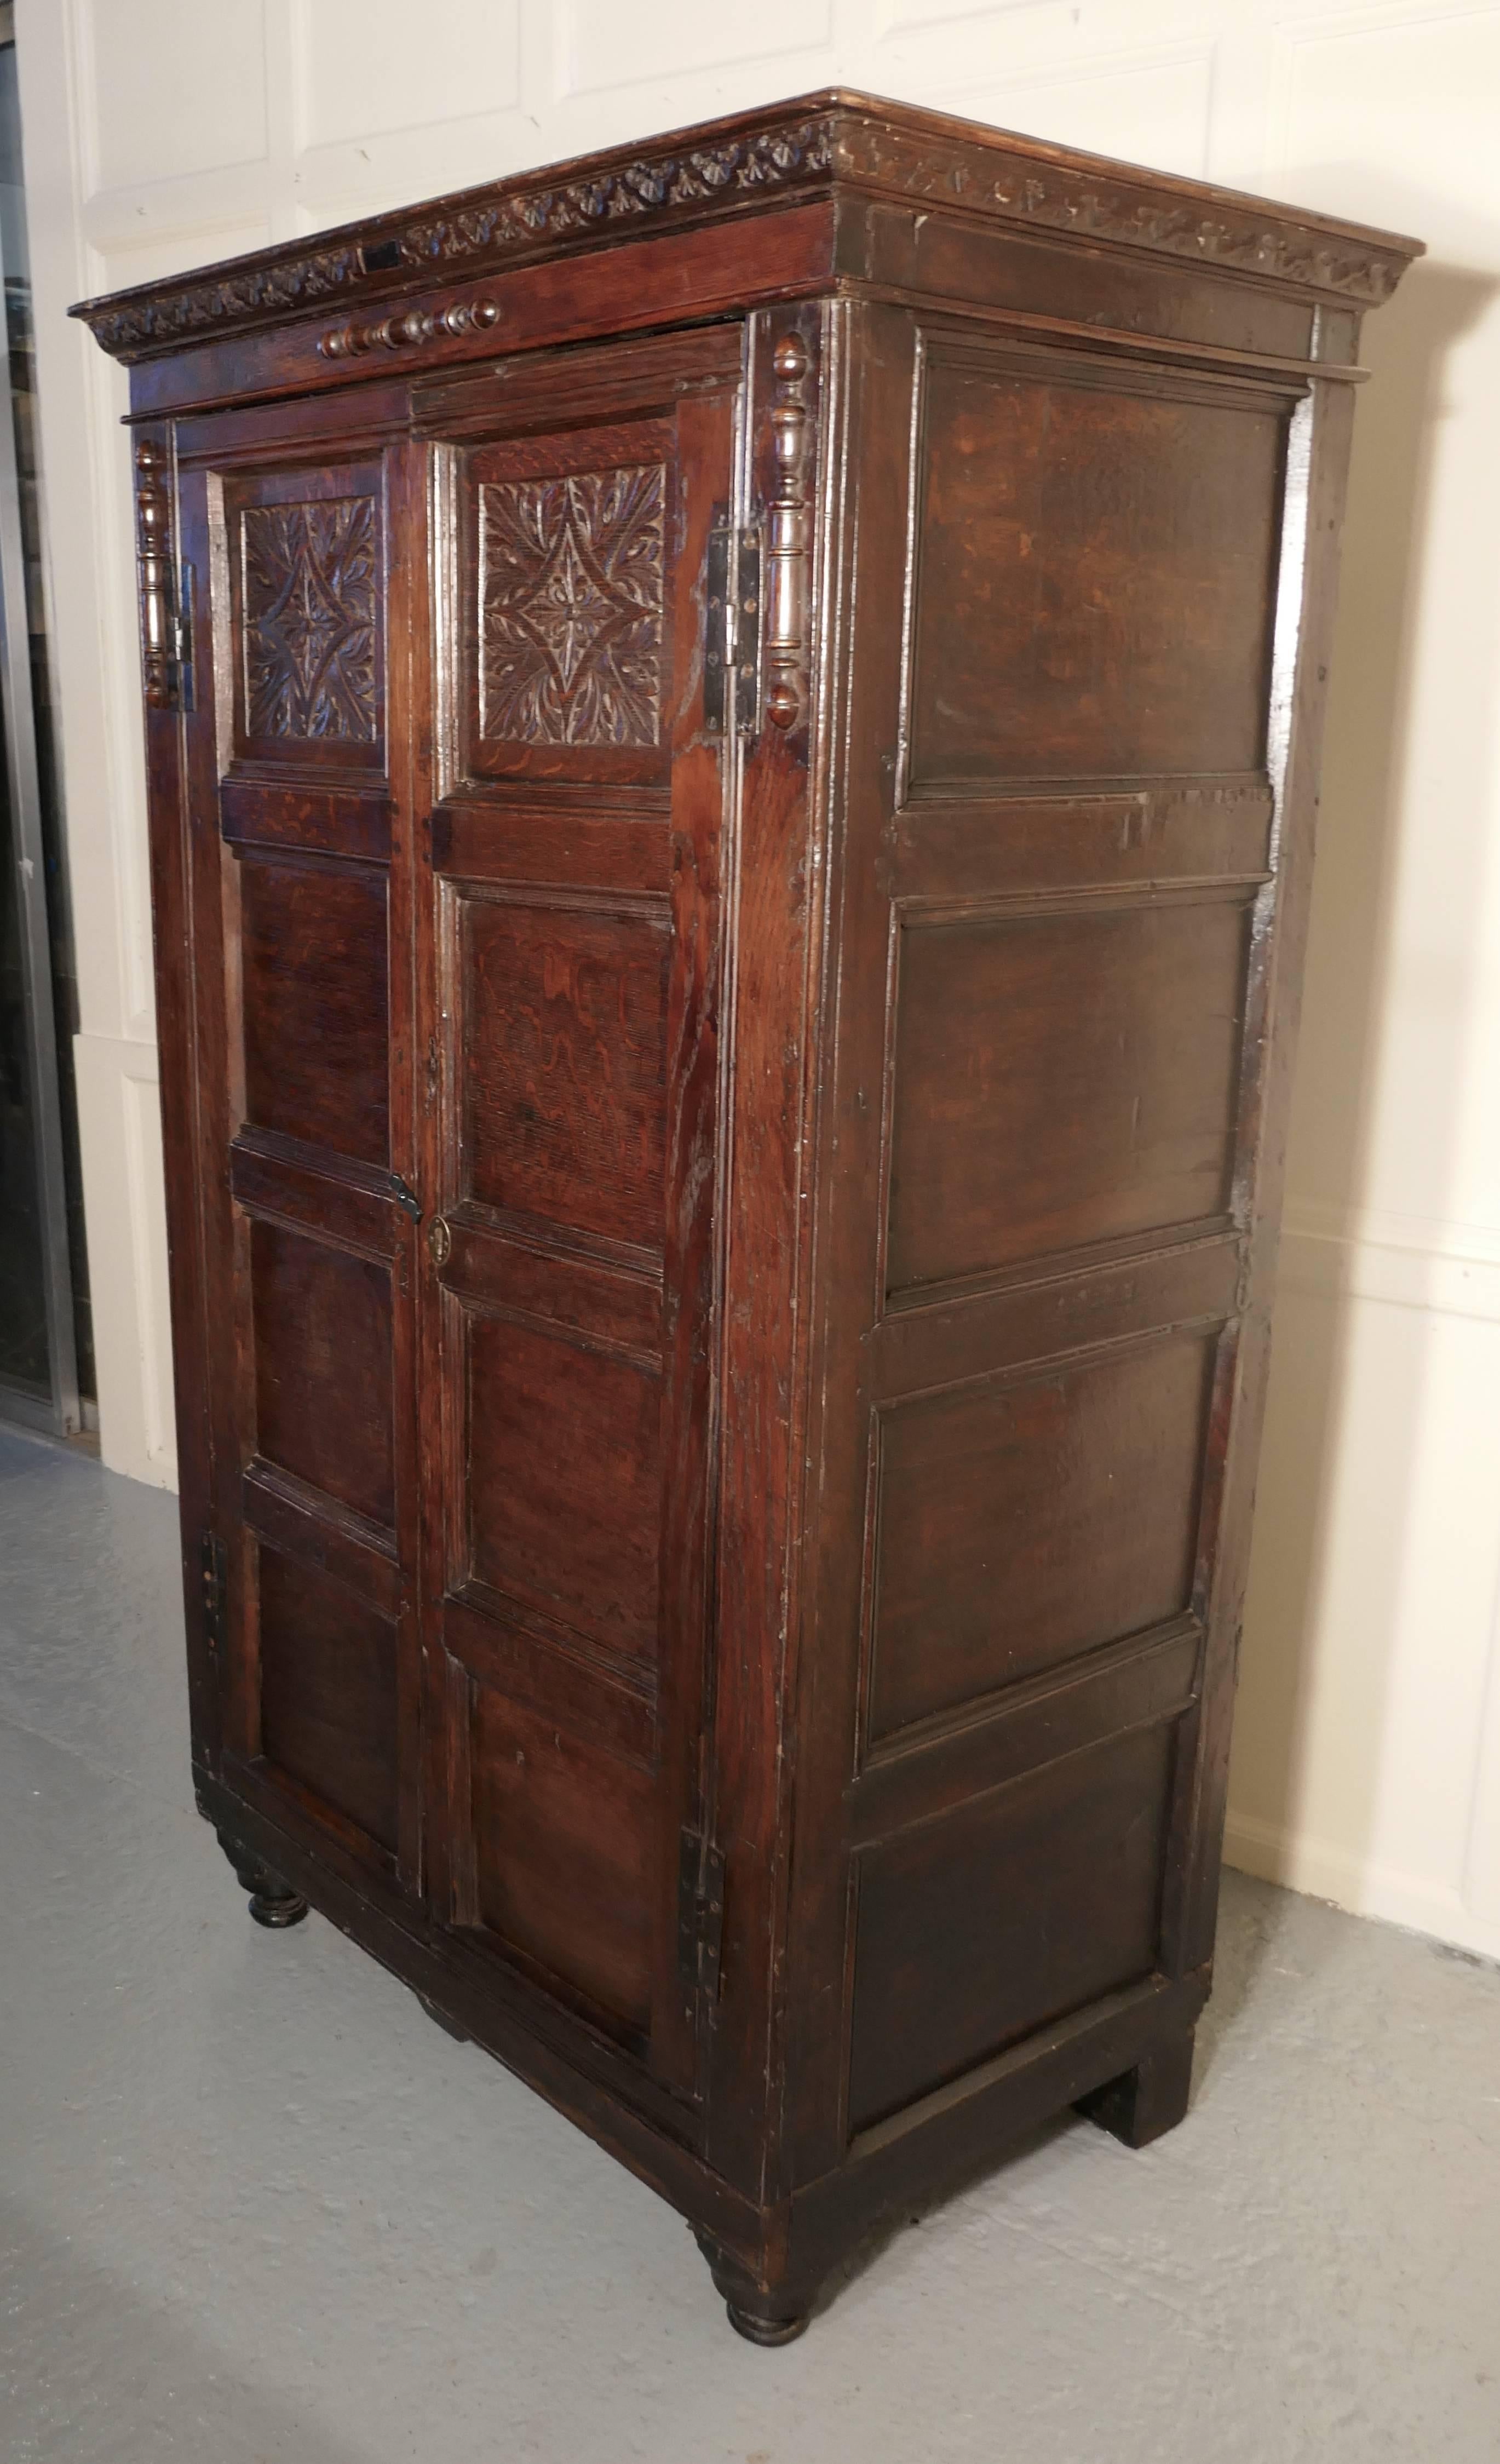 17th century carved oak cupboard or wardrobe

This is a charming full length hanging cupboard, the cupboard was made in the 19th century with oak panels which are from the 17th century
The cupboard is made up entirely with 17th century oak